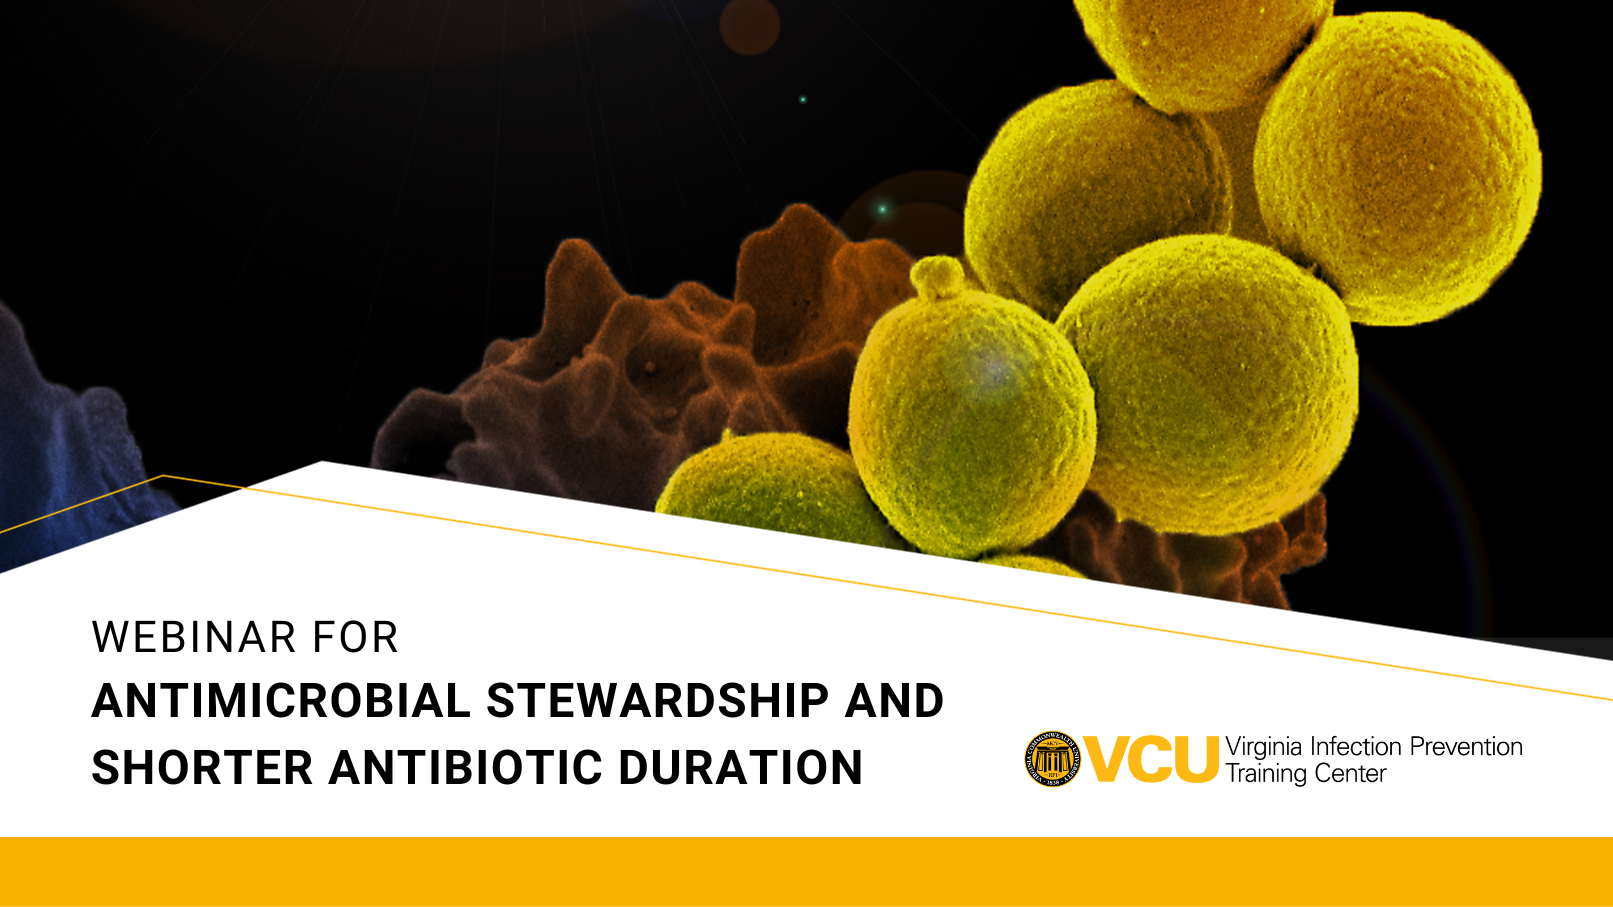 Image of microbes with VCU logo and title of webinar.